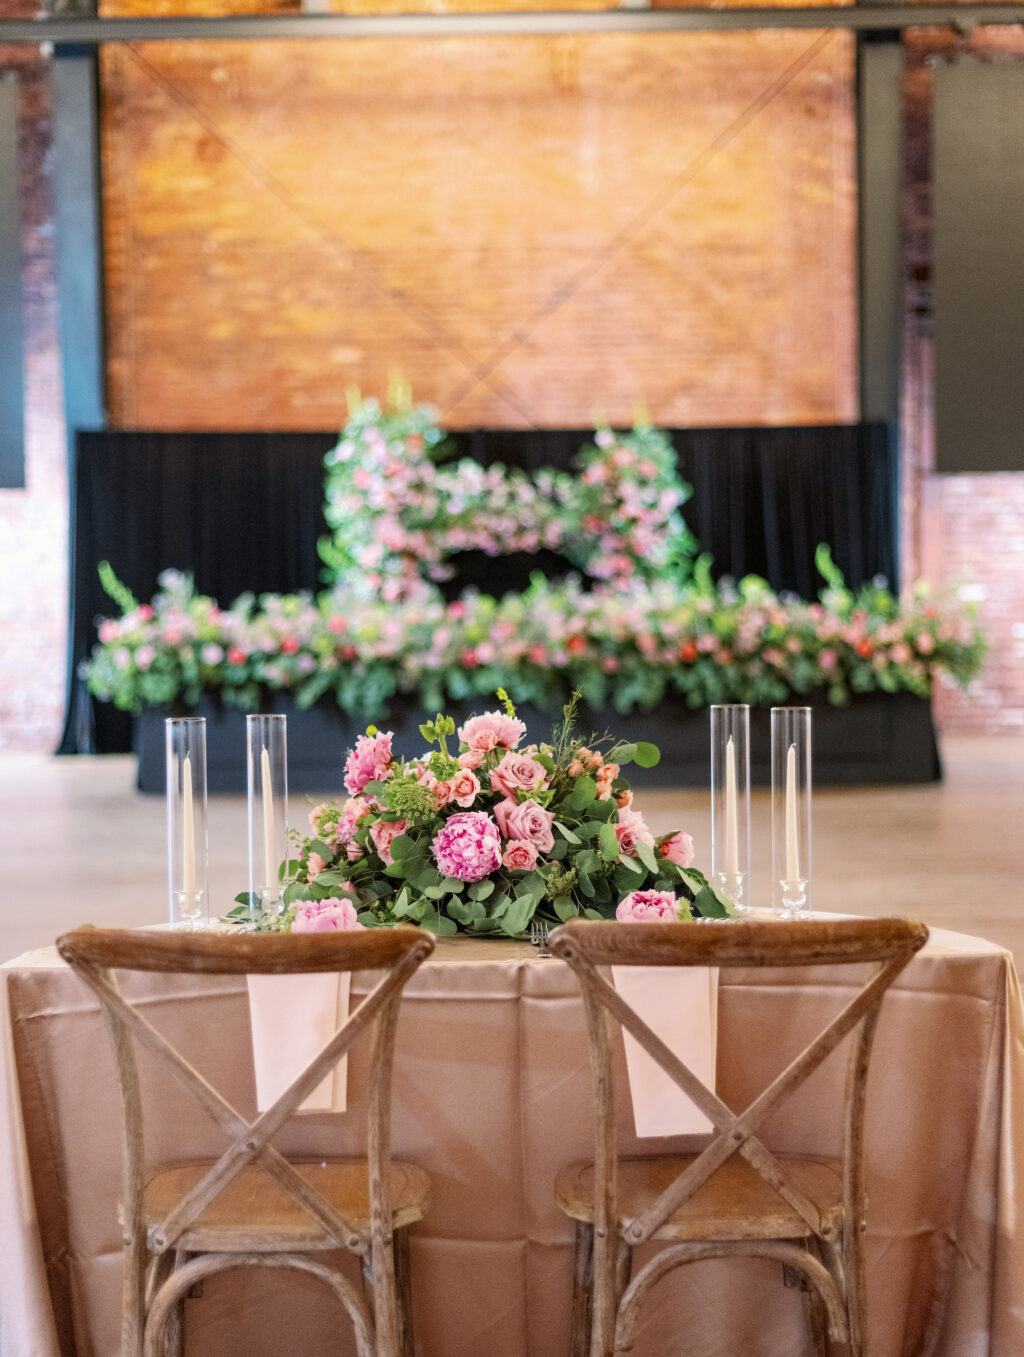 Crossback Wooden Chairs with Taper Candles in Hurricane Tubes Glass | Pink Roses and Greenery Centerpiece Wedding Reception Inspiration | Tampa Bay Rental A Chair Affair